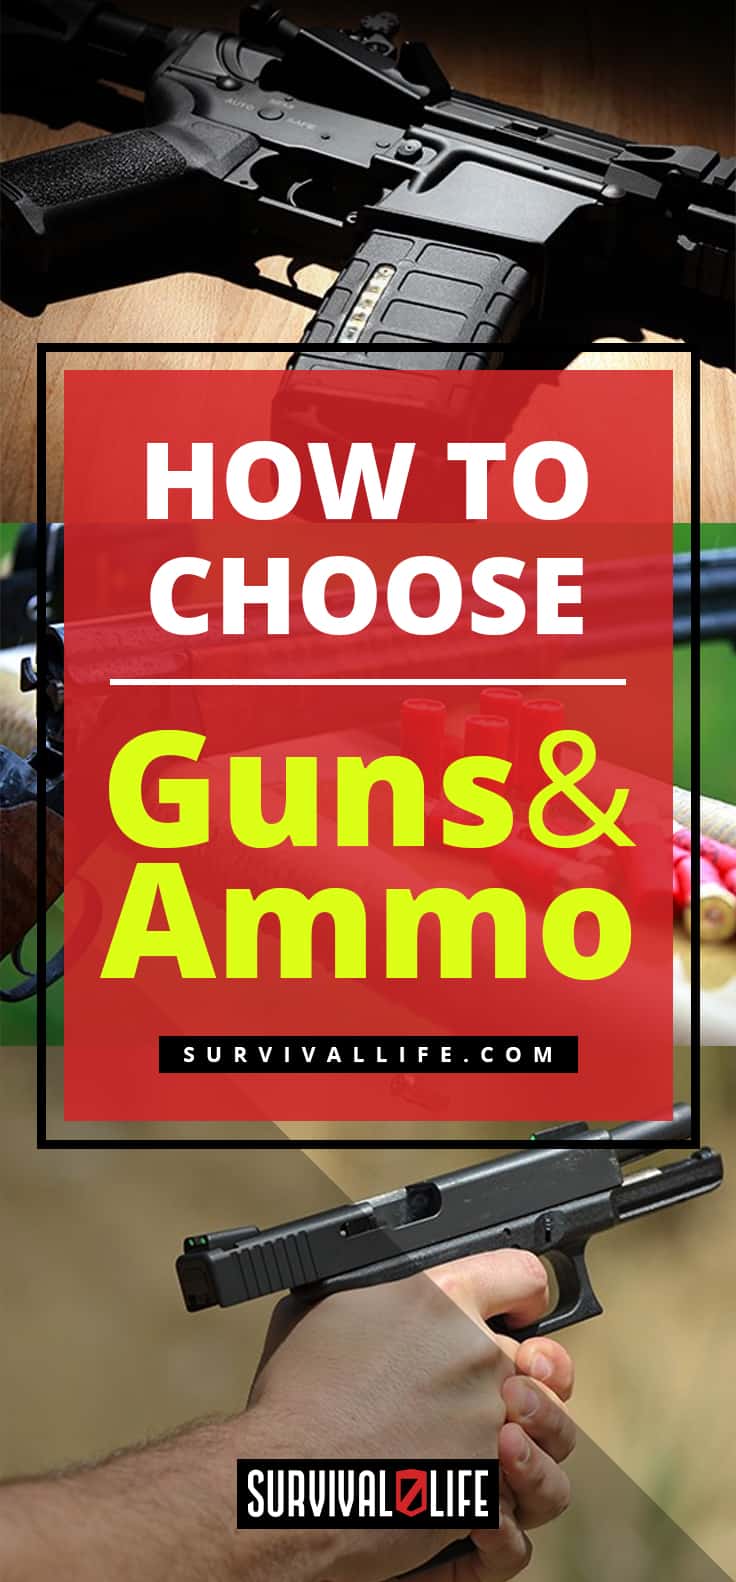 Guns and Ammo | How to Choose Guns and Ammo